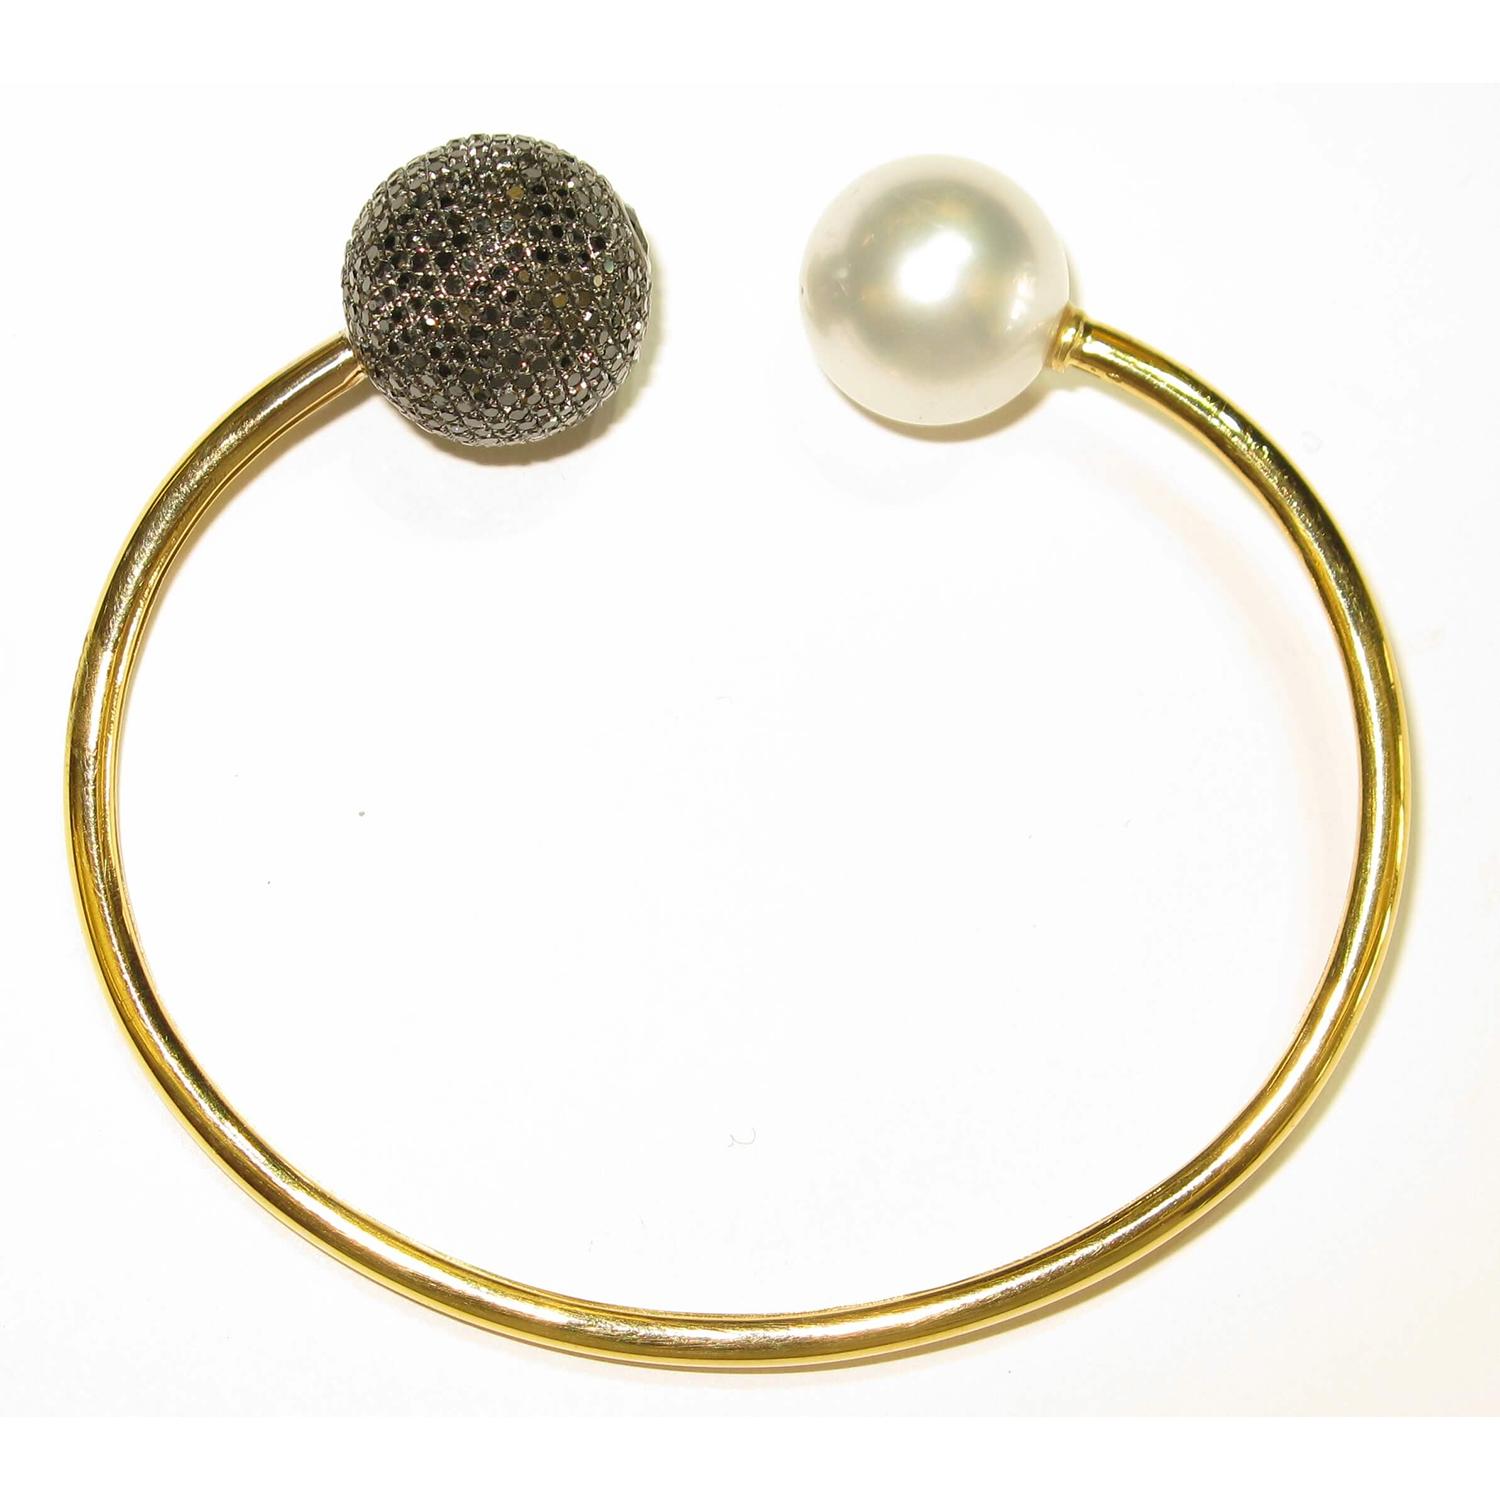 This stunning 18K Gold Pearl & Black Diamond Ball Temper Bangle sits perfectly on most of the wrist sizes. It can worn easily by twisting a little. Match them perfectly with Ball/Tribal earrings by Artisans for any occasion.